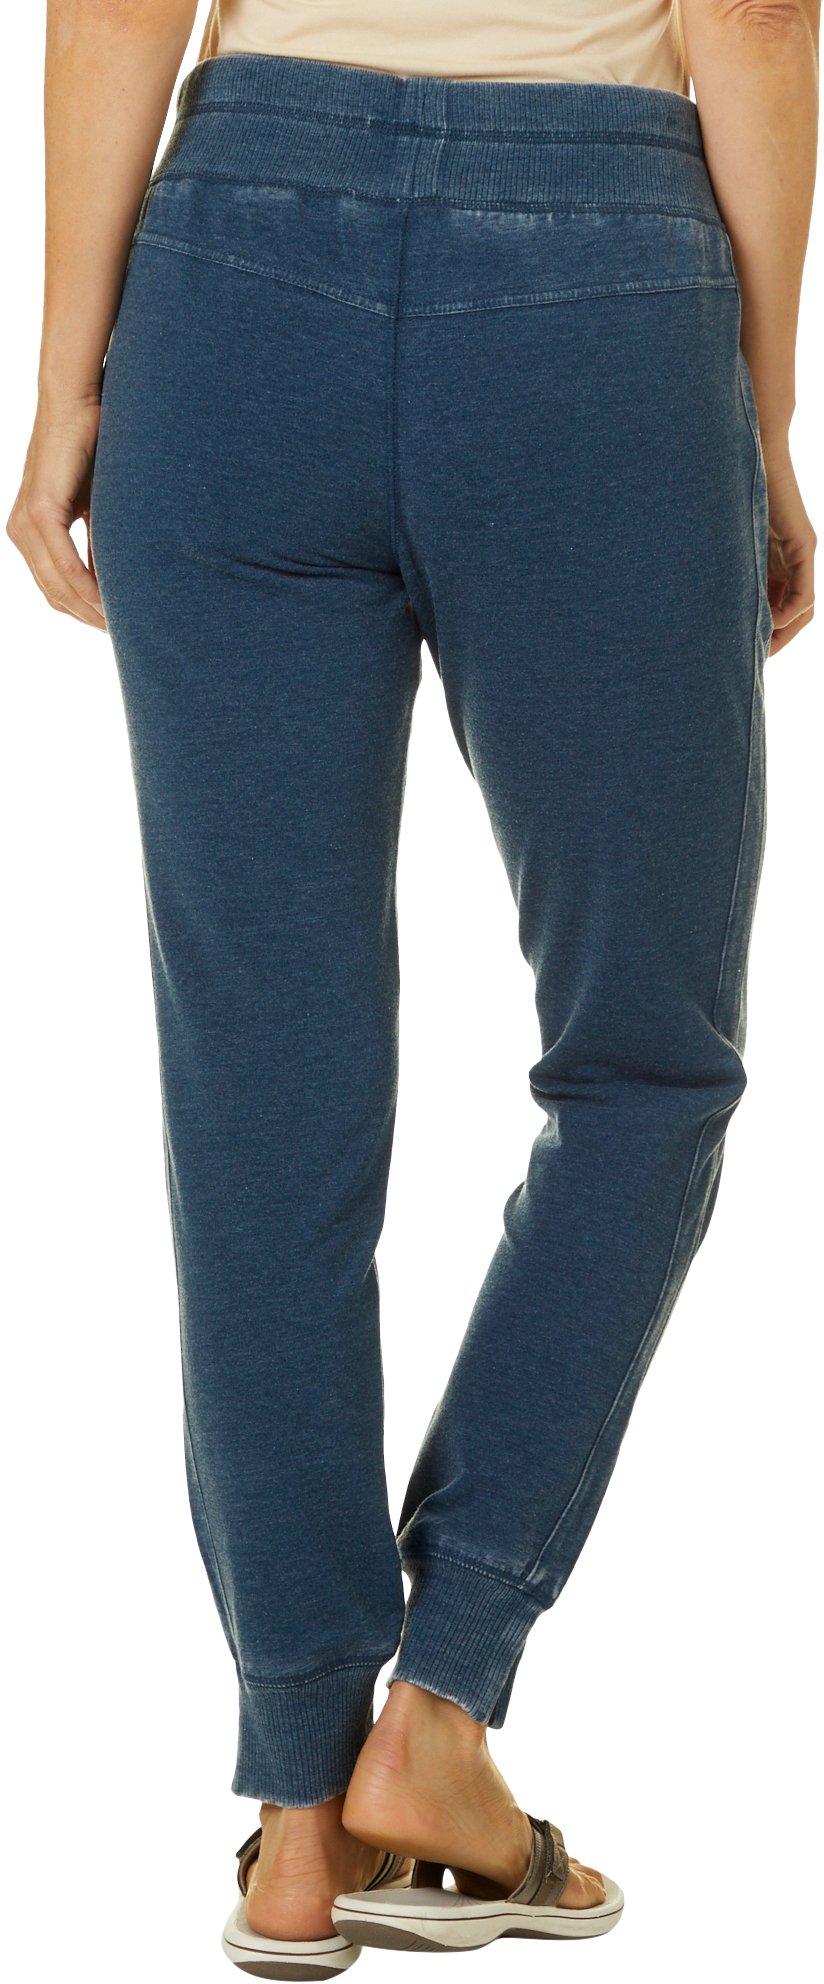 Brisas Womens Solid Mineral Wash Knit Lounge Pants X-Large Blue teal | eBay